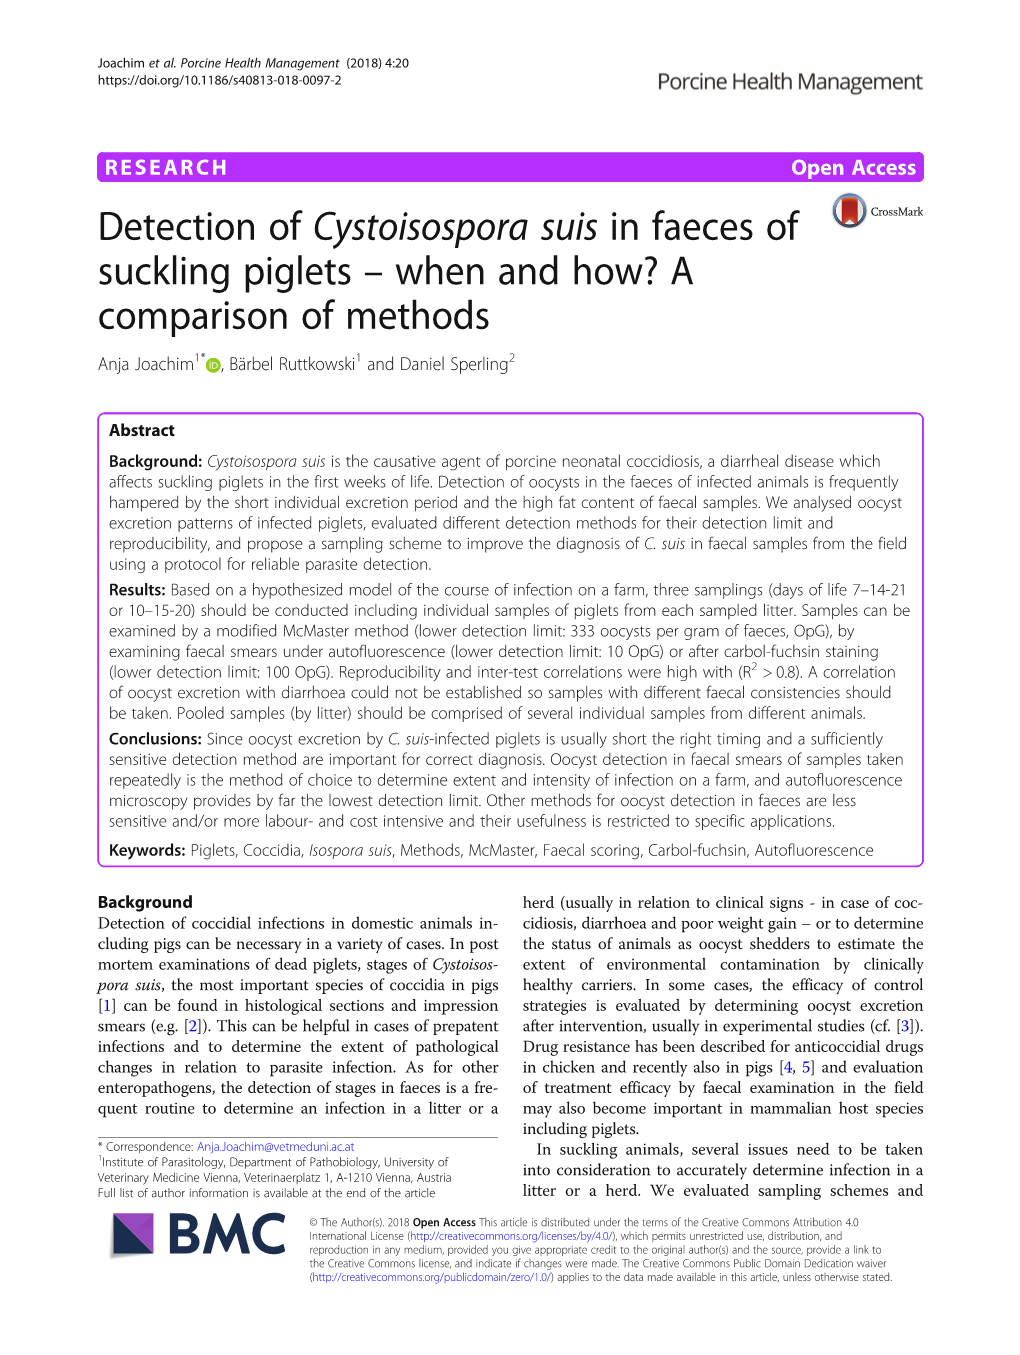 Detection of Cystoisospora Suis in Faeces of Suckling Piglets – When and How? a Comparison of Methods Anja Joachim1* , Bärbel Ruttkowski1 and Daniel Sperling2